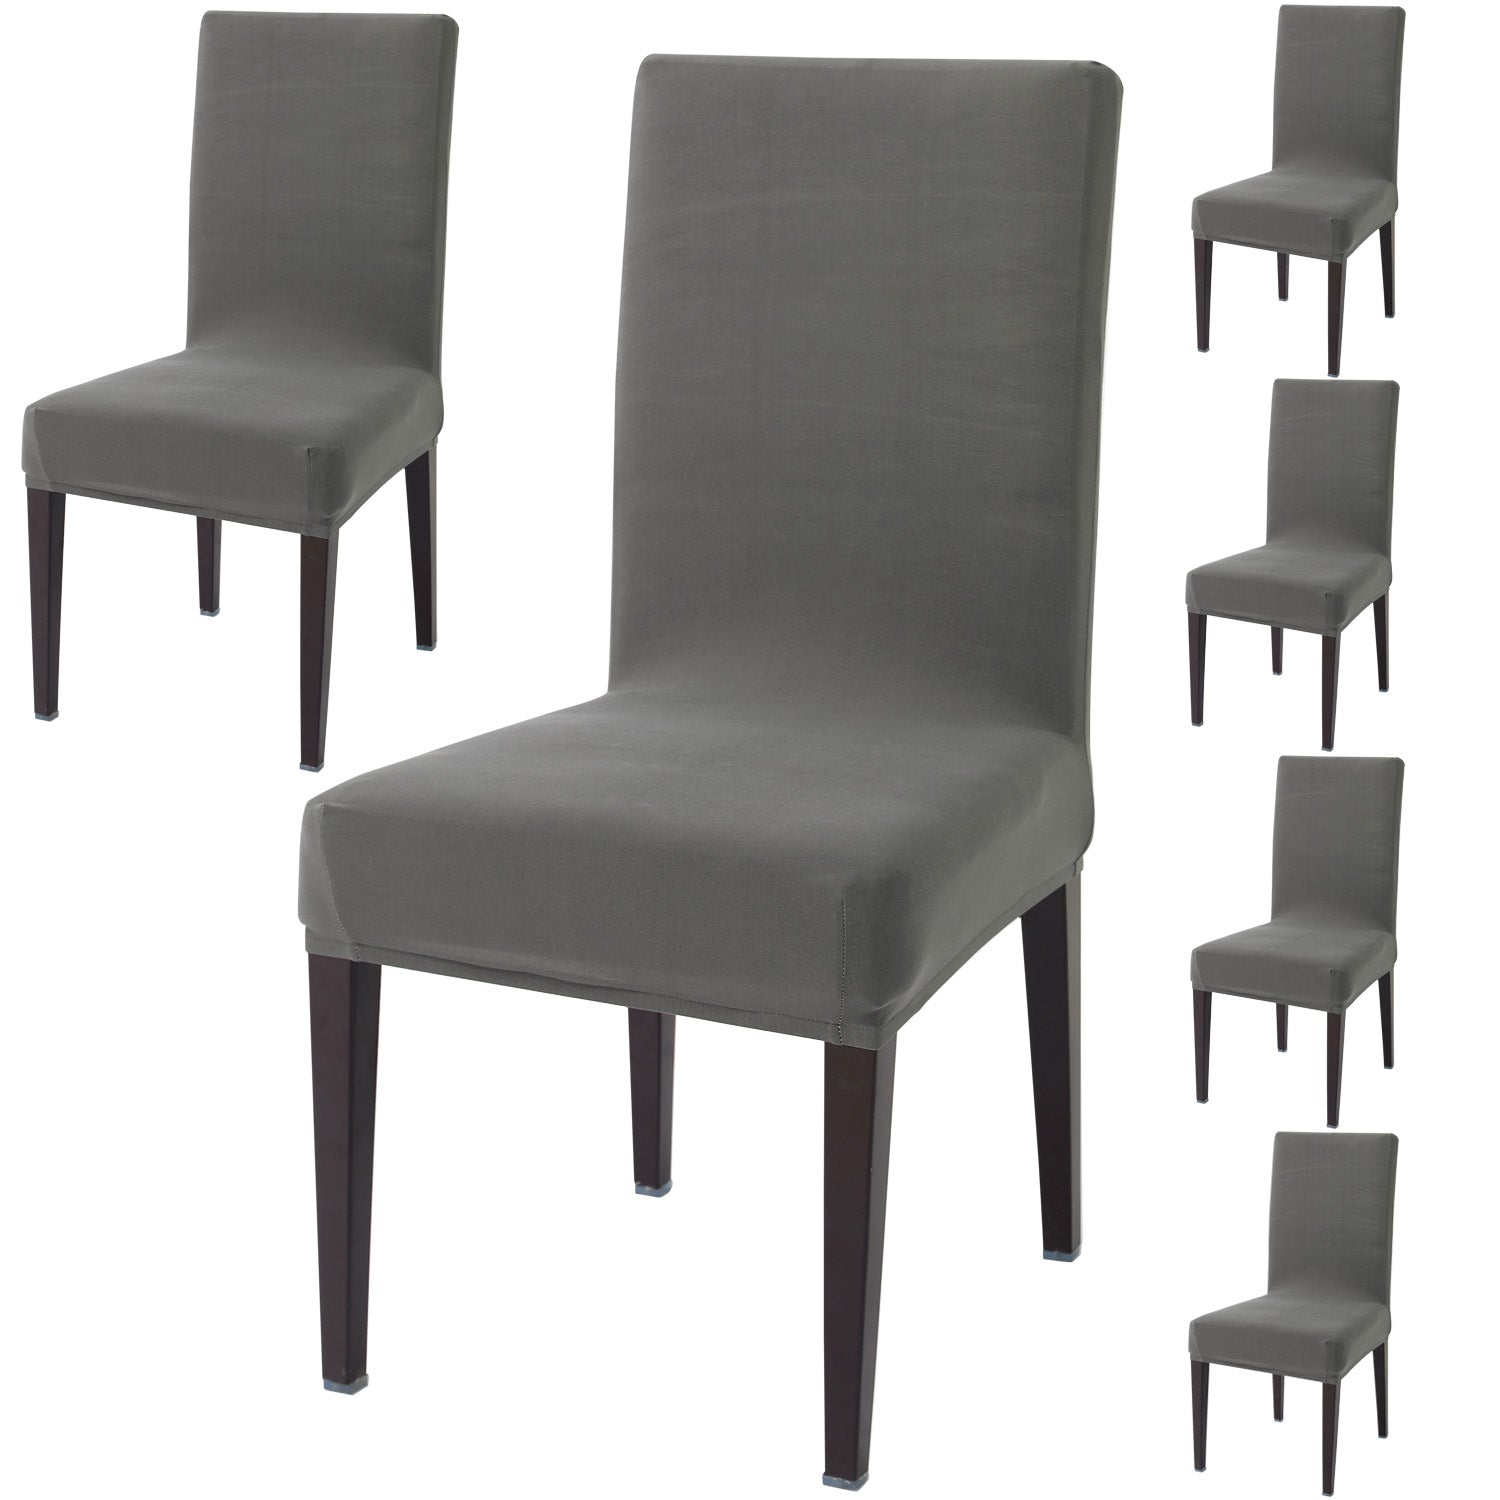 Elastic Stretchable Dining Chair Cover, Light Grey